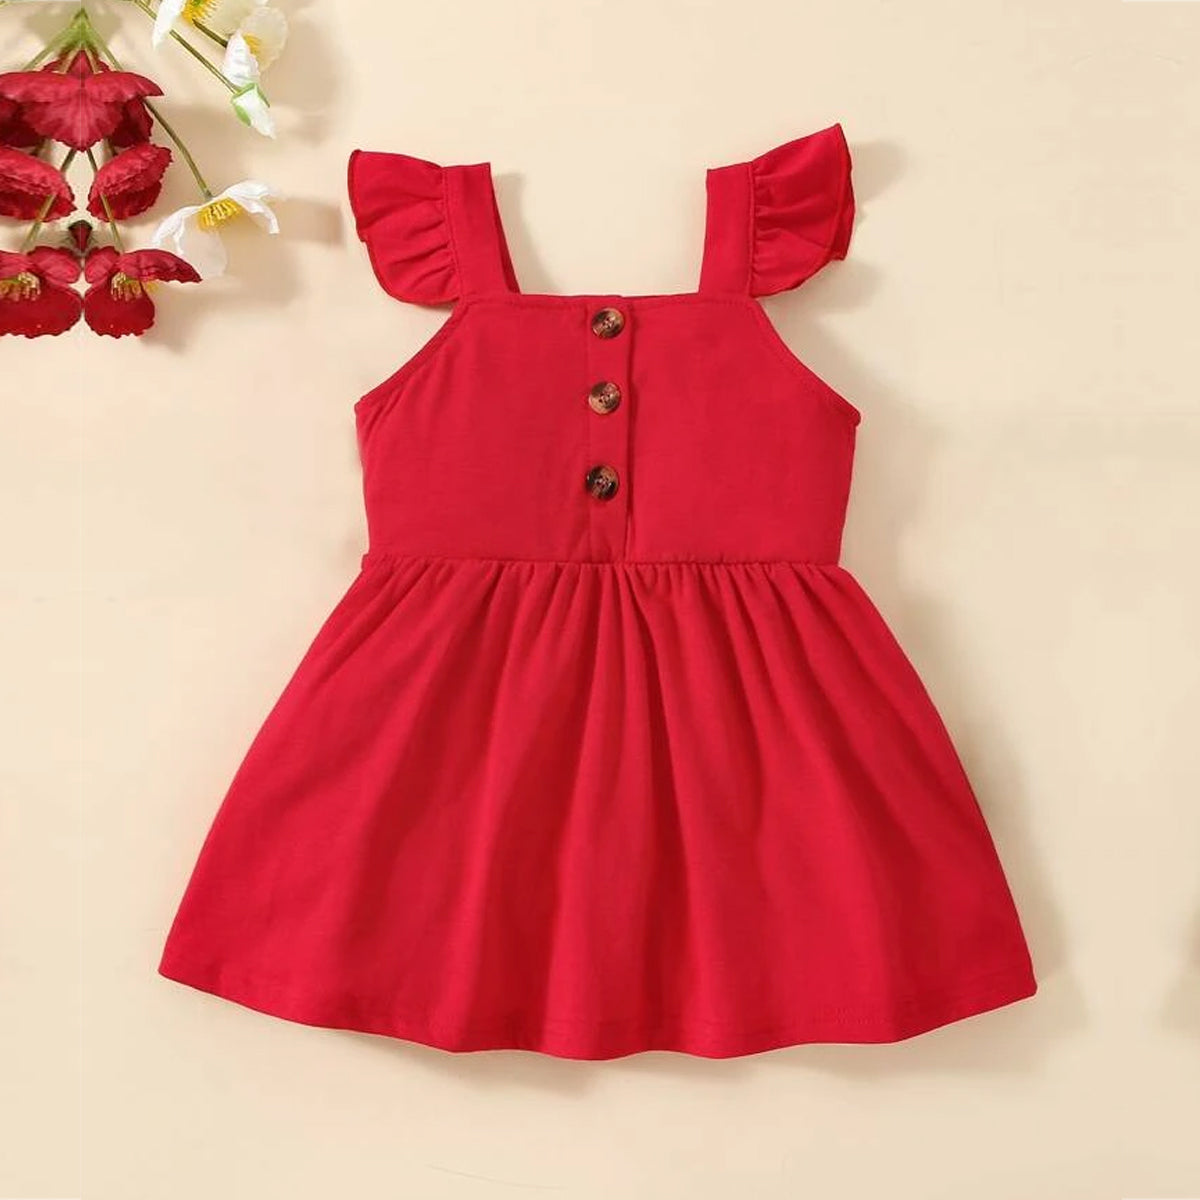 BabyGirl Princess Cotton Cherry & Maroon Cami Dresses_Frocks Combo Pack Of 2 for Baby Girls.